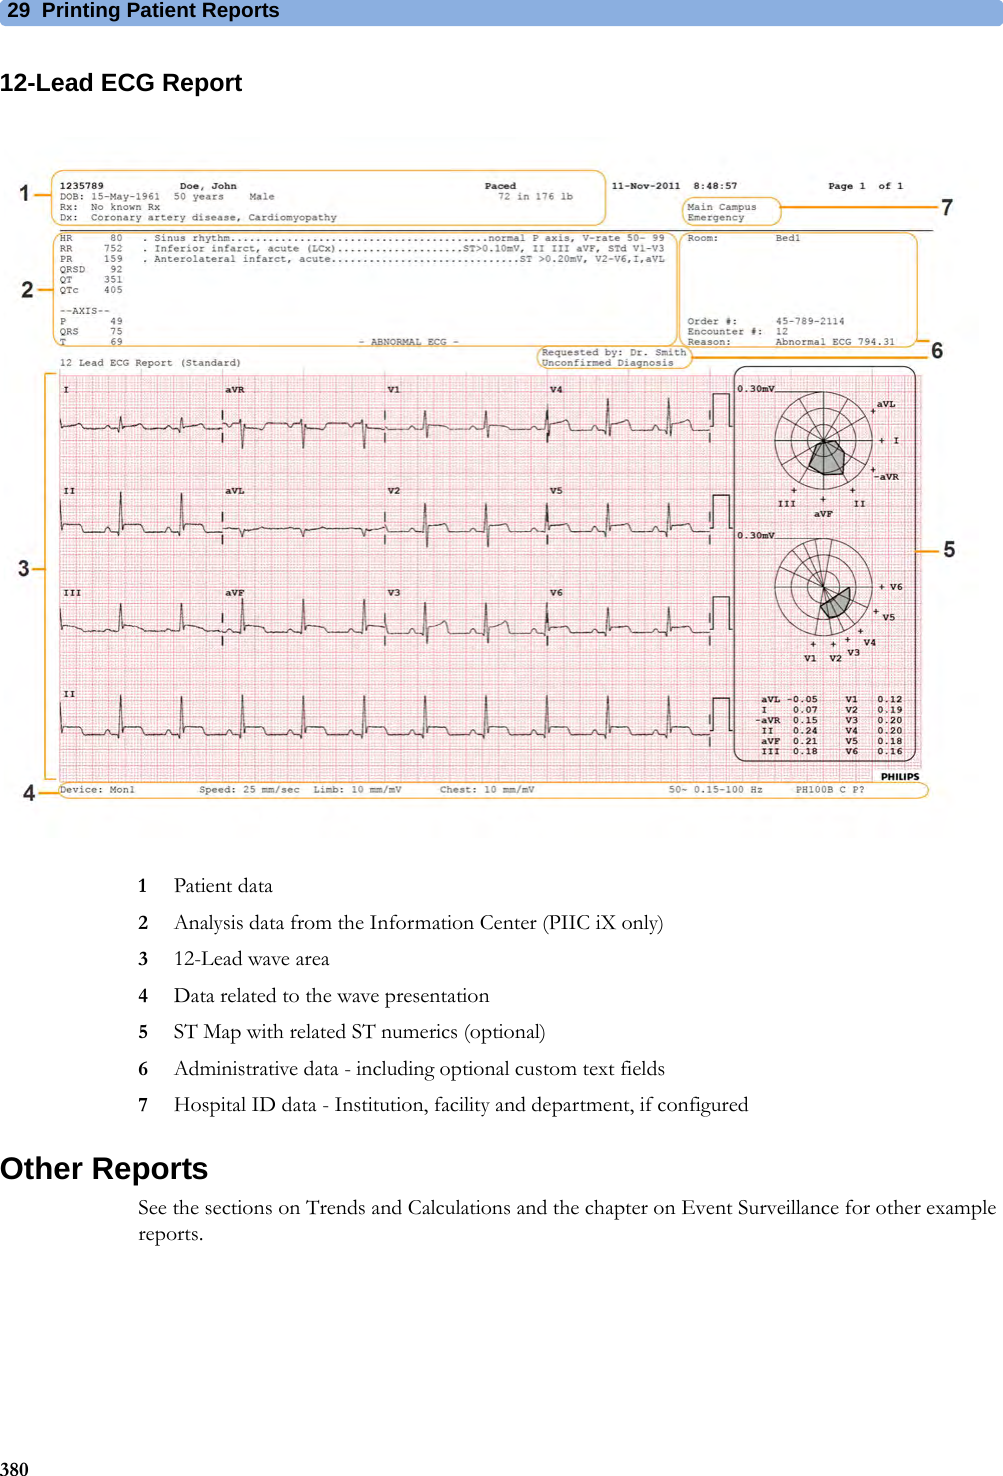 29 Printing Patient Reports38012-Lead ECG Report1Patient data2Analysis data from the Information Center (PIIC iX only)312-Lead wave area4Data related to the wave presentation5ST Map with related ST numerics (optional)6Administrative data - including optional custom text fields7Hospital ID data - Institution, facility and department, if configuredOther ReportsSee the sections on Trends and Calculations and the chapter on Event Surveillance for other example reports.